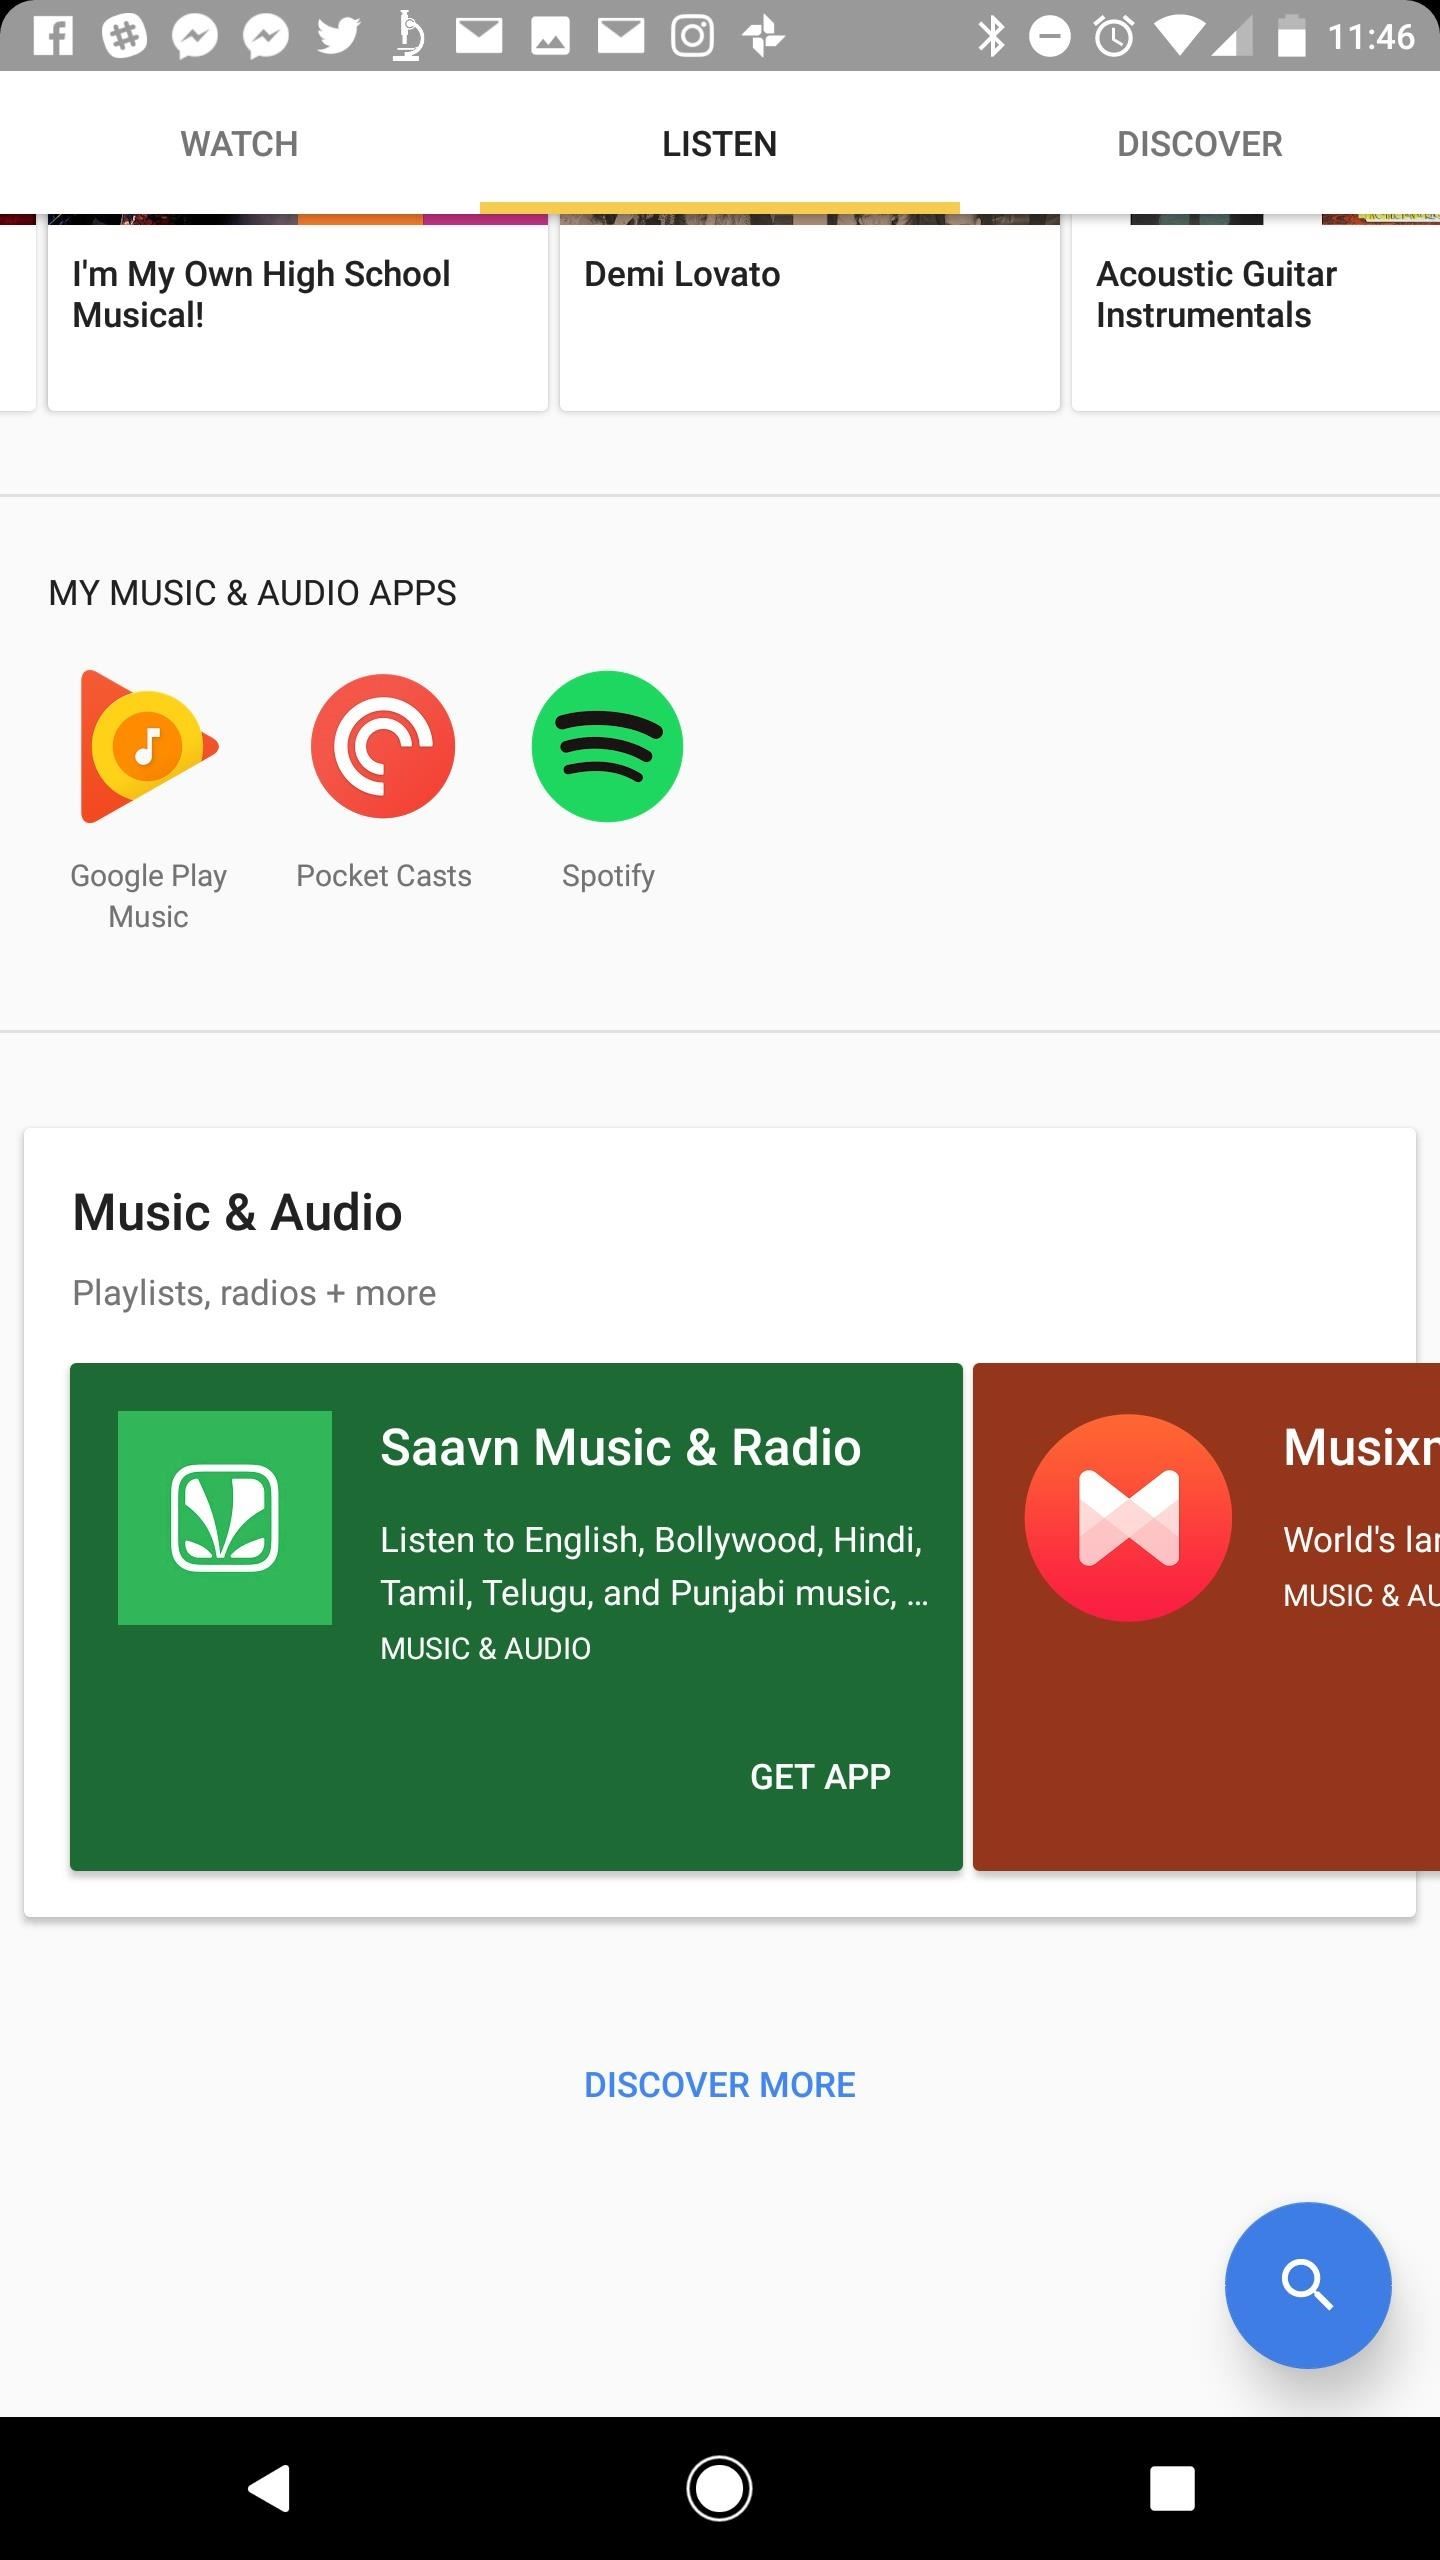 Google Home's New 'Listen' Tab Makes It Easy to Discover Music You'll Love